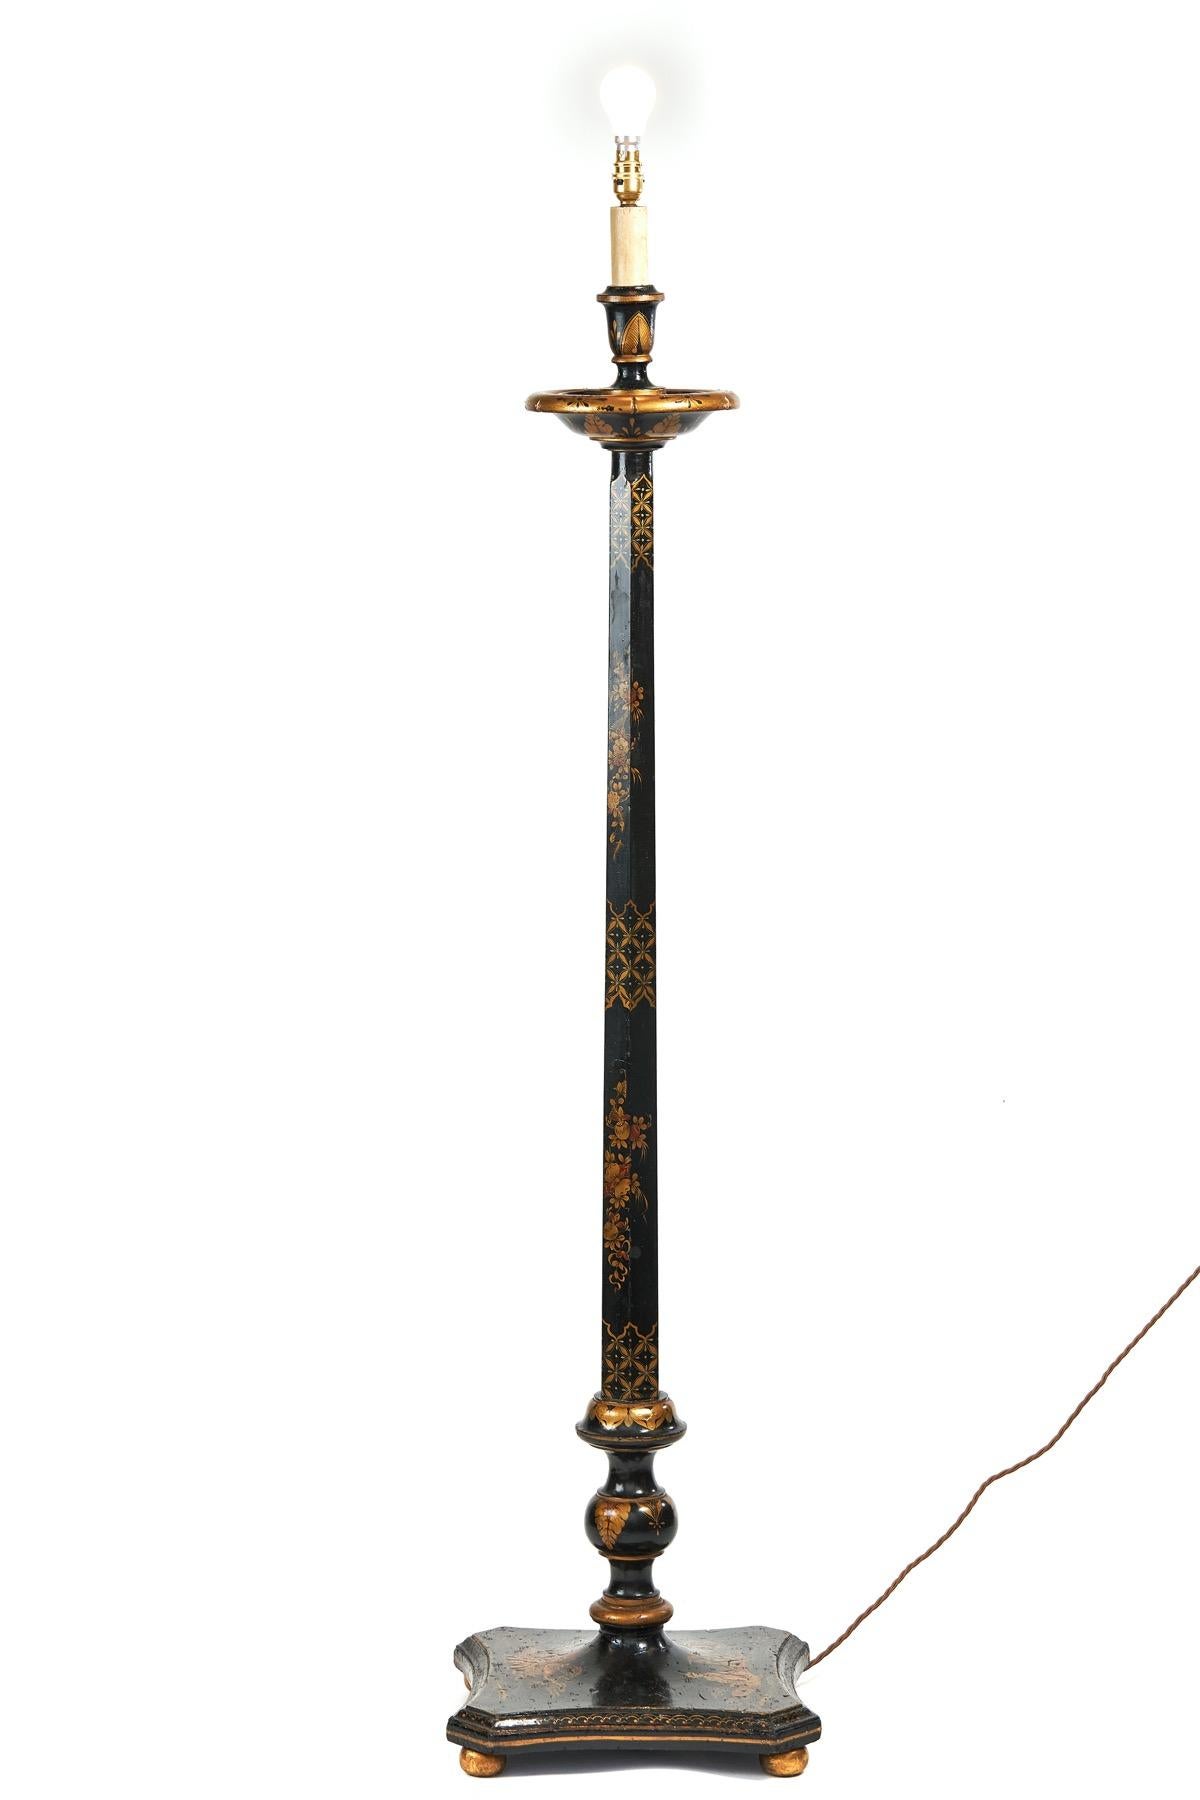 Chinoiserie Decorated Standard Lamp circa 1930s
Black & gold in colour, 
Turned & Tapering Column. Decorated with Gold Lattice Pattern & Floral & leaf detail
Square Shaped Base Decorated with Figure, House, Trees & flowers & Foliage
Sitting on 4